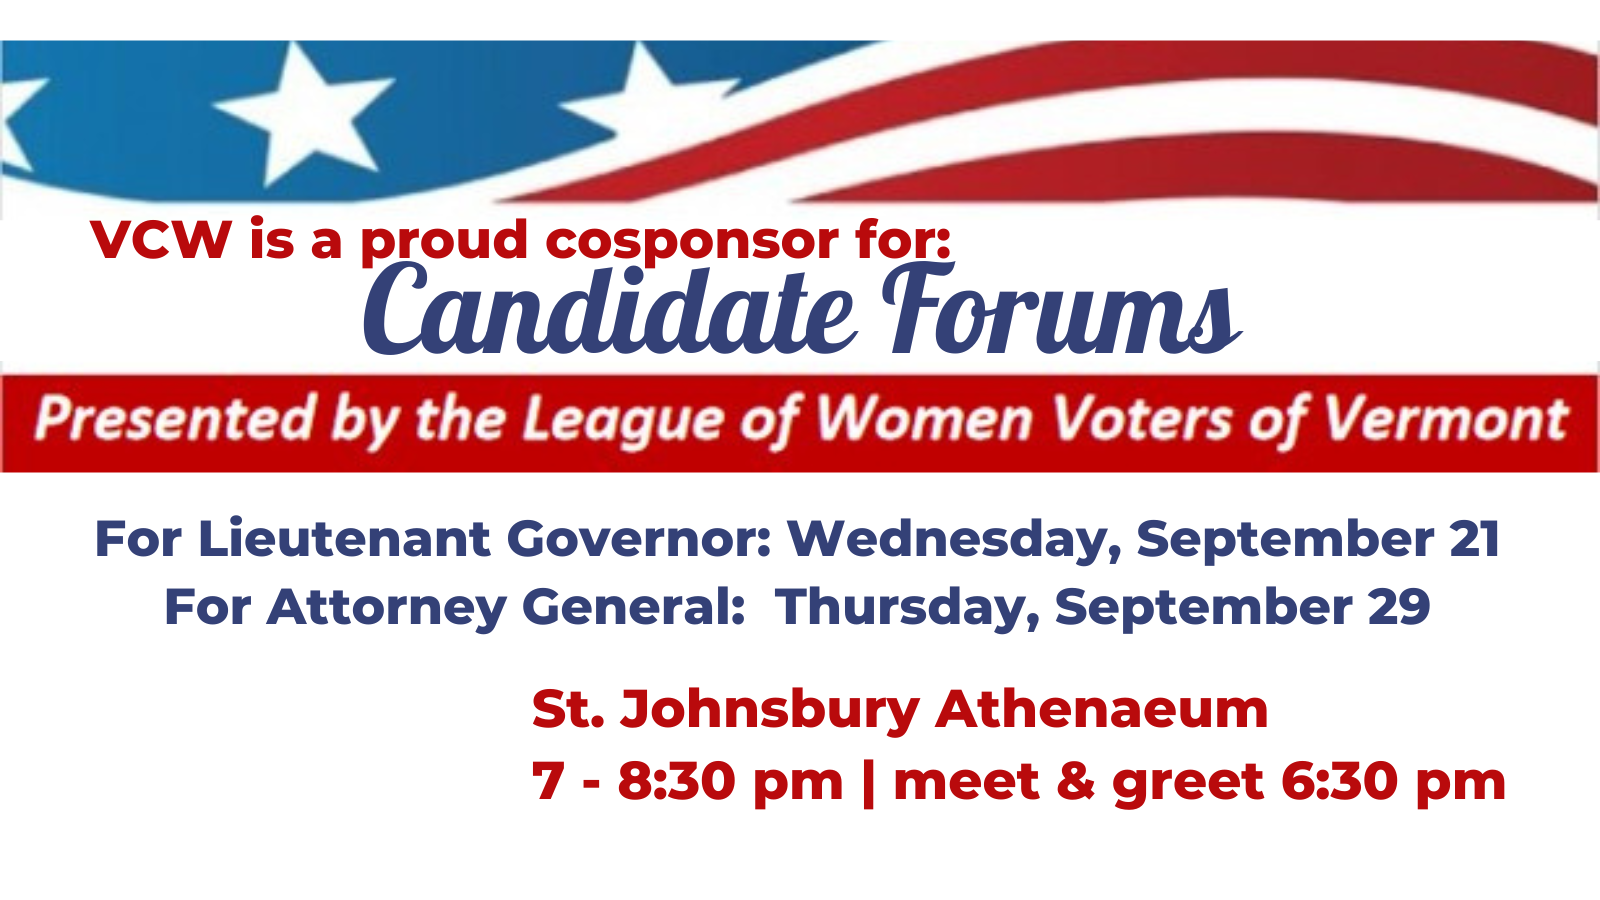 Flag graphic with text that says VCW is a proud cosponsor for Candidate forums presented by the League of Women Voters of Vermont for Lt. Governor Wednesday, Sept 21 For Attorney General, Thursday, Sept 29 St. Johnsbury Athenaeum